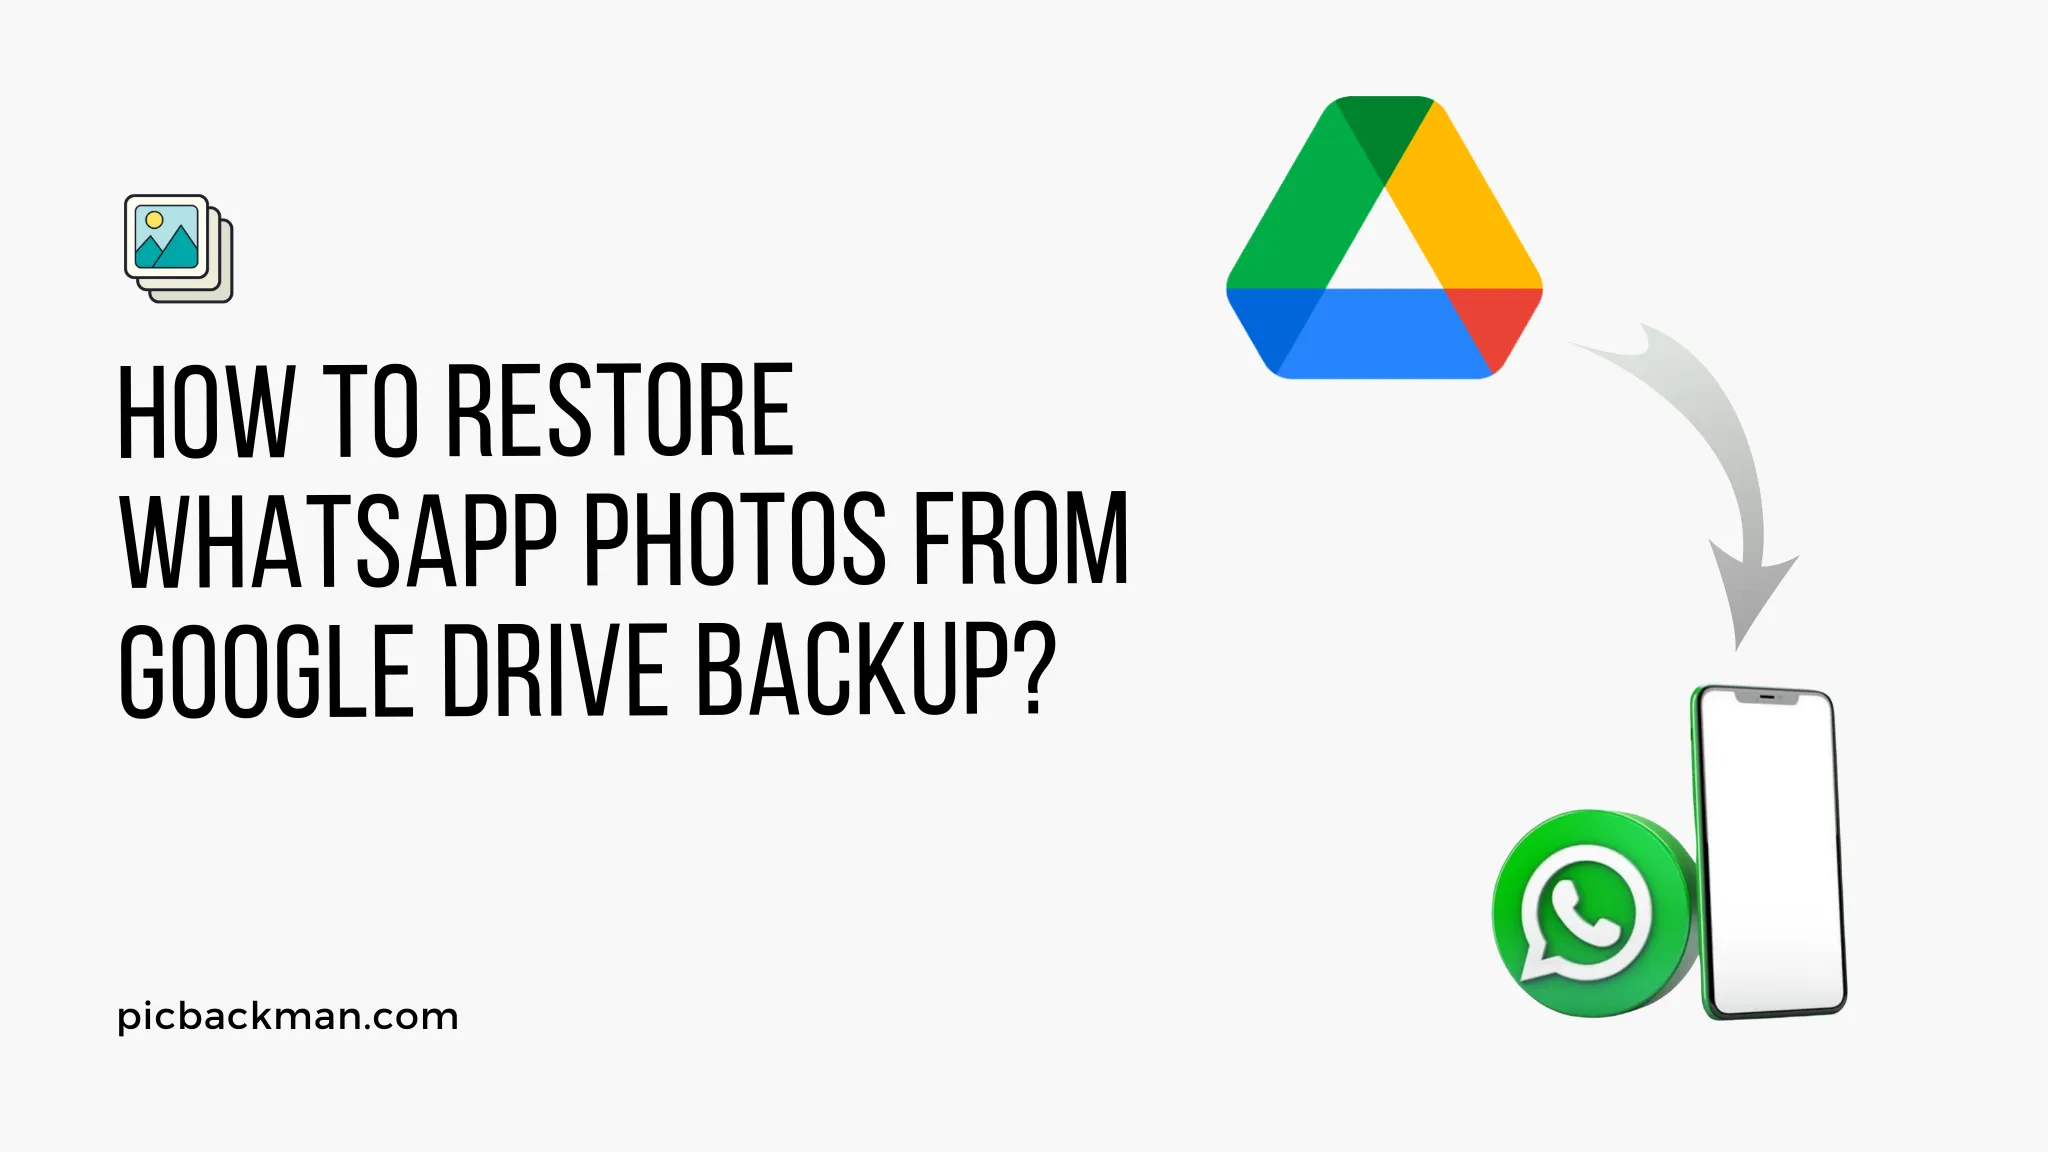 How to Restore WhatsApp Photos from Google Drive Backup